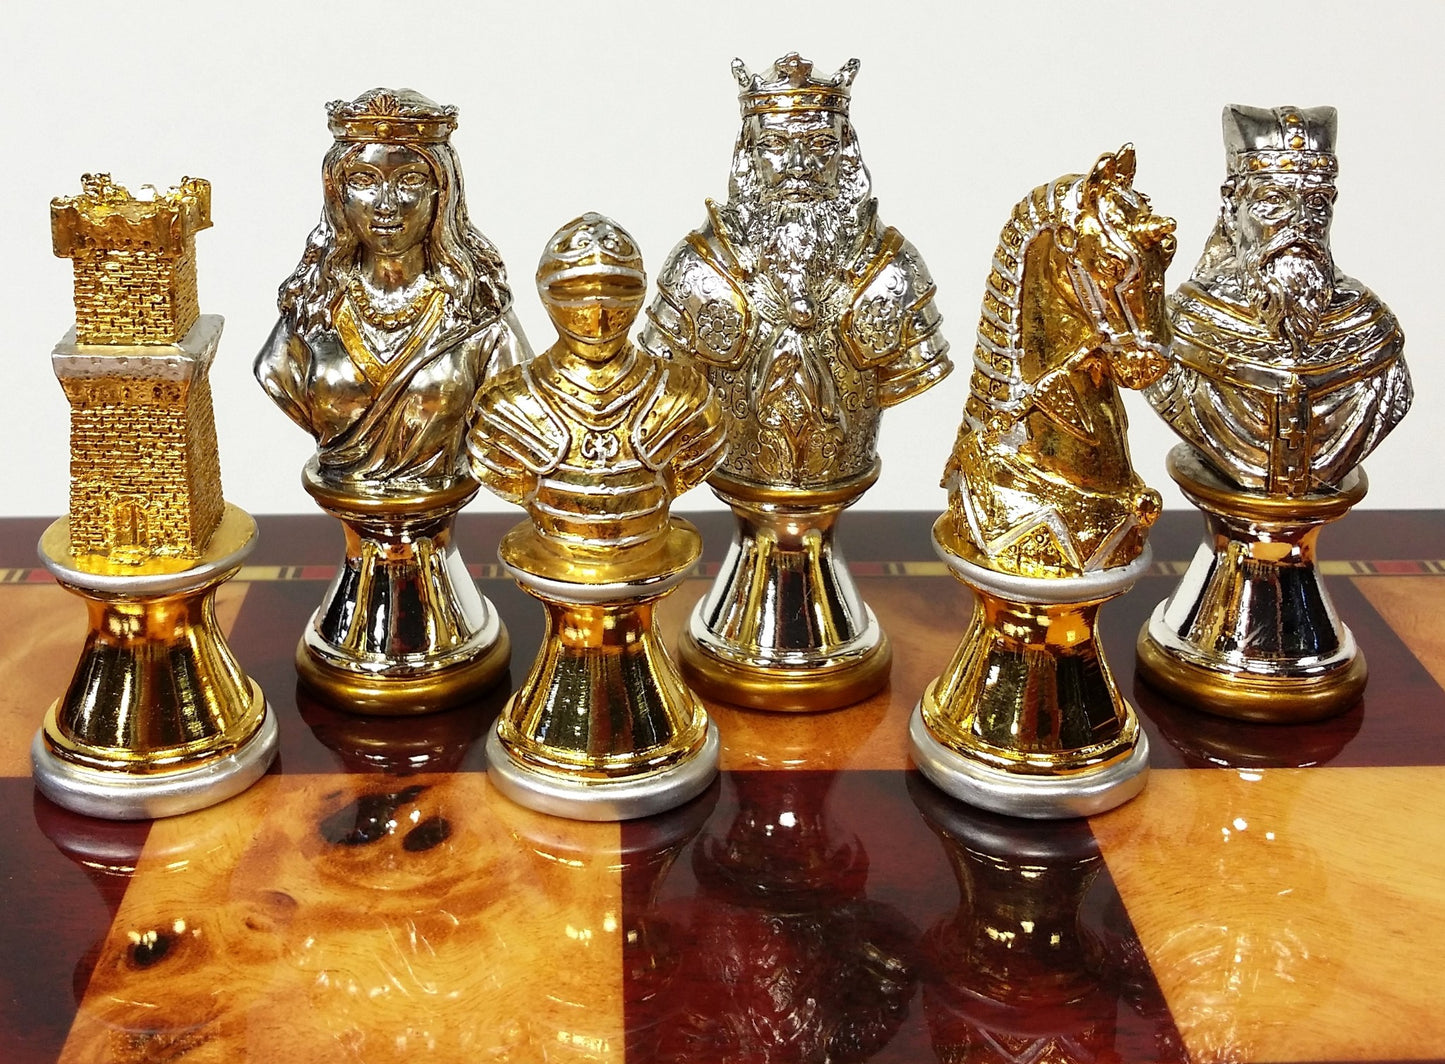 METAL Medieval Times Crusades Gold Silver Busts Chess Set Cherry Color Storage B